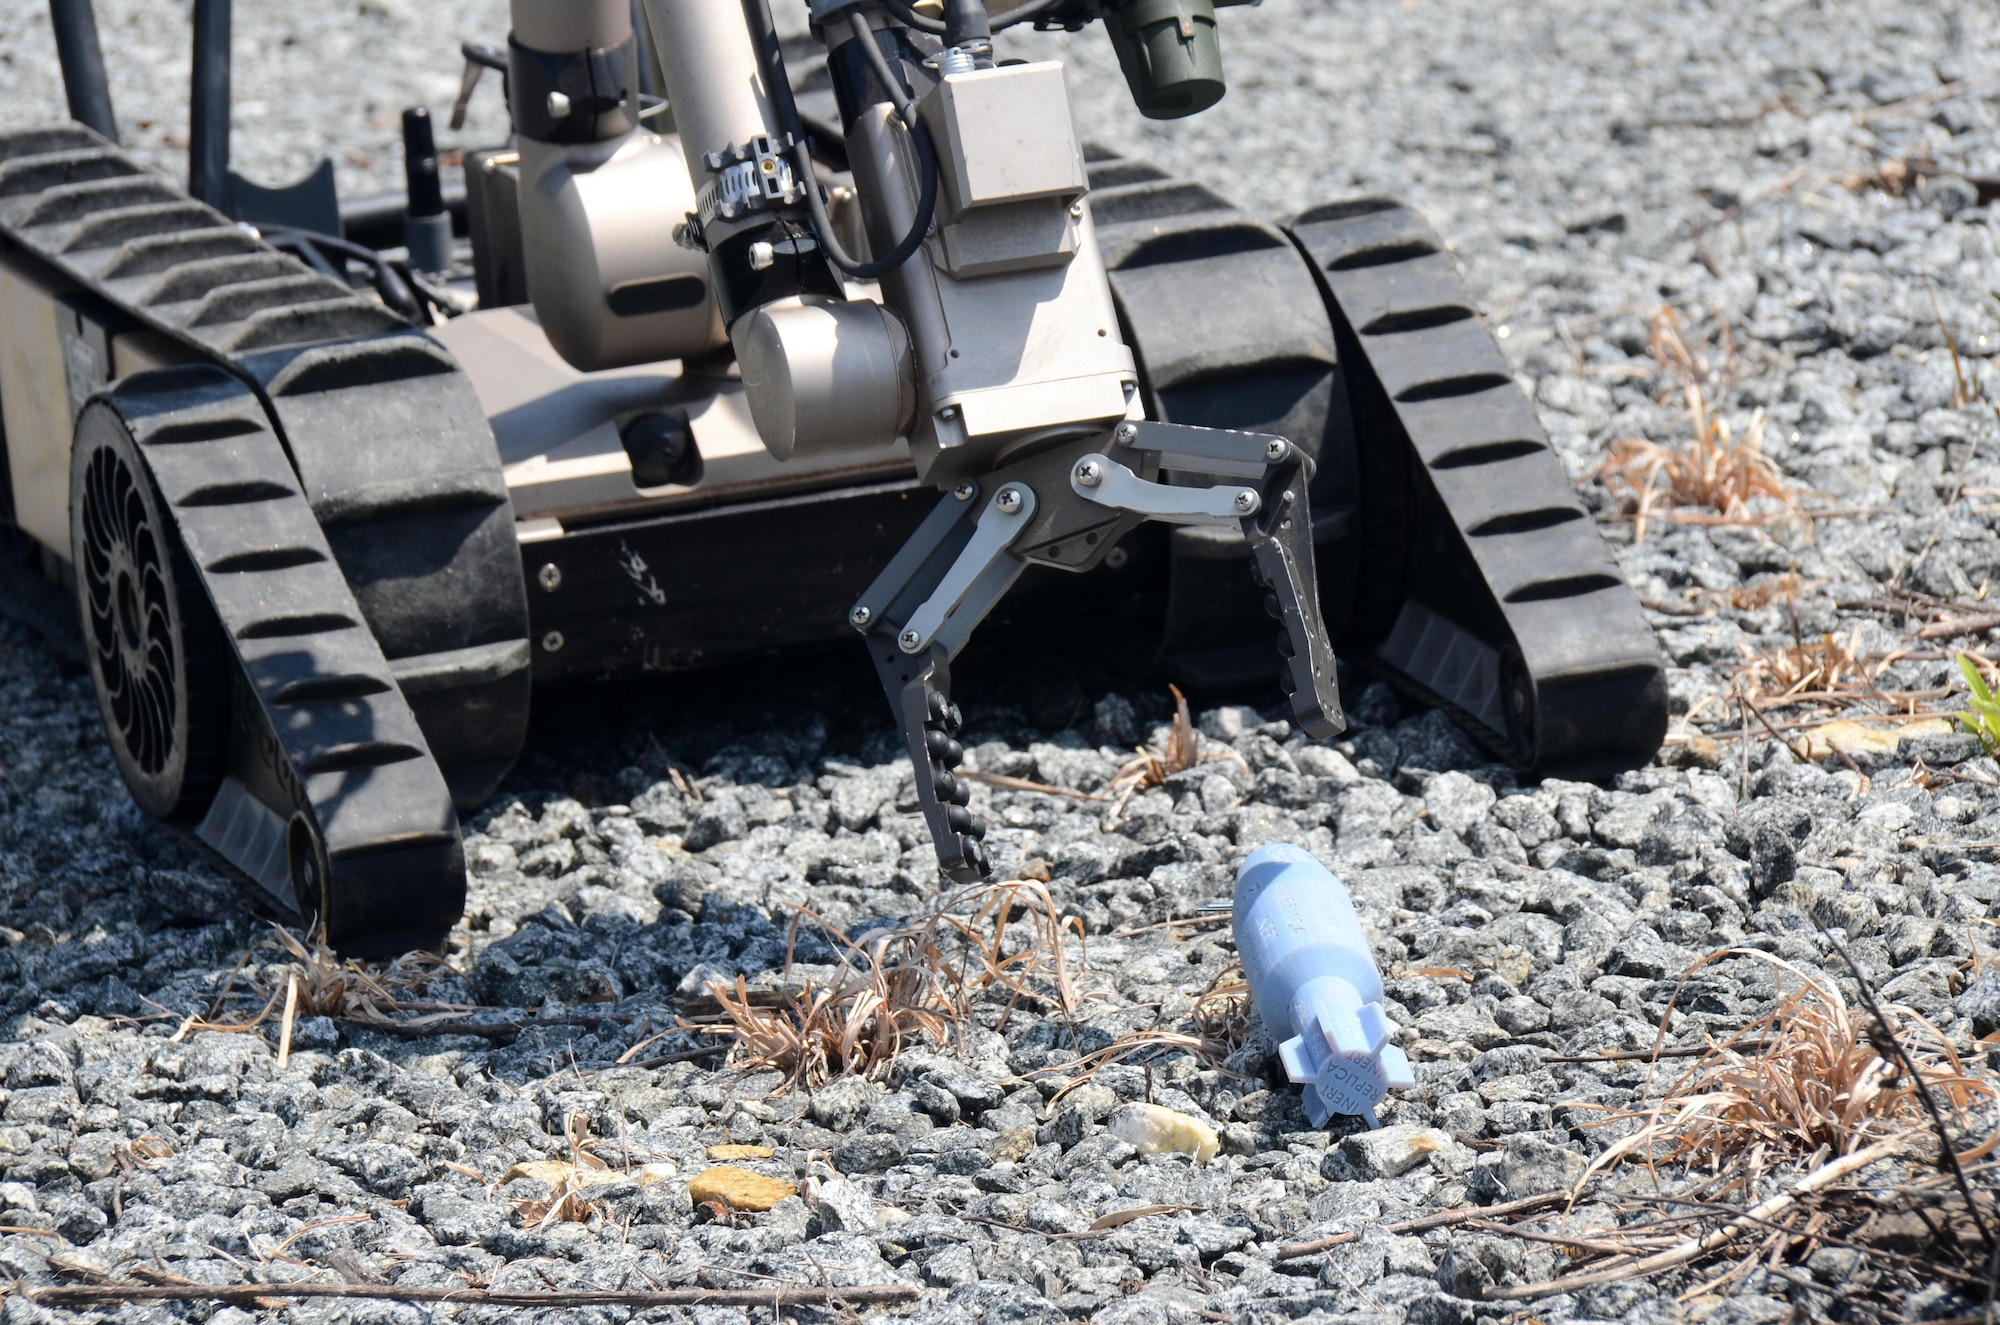 An explosive ordnance disposal robot reaches for a simulated explosive device during this year's Eastern National Robot Rodeo at Dobbins Air Reserve Base, Ga. Aug. 21, 2017. In designing the different training scenarios for the event, evaluators relied on a variety of locations both on and off base to provide realistic situations for testing the robots’ capabilities. (U.S. Air Force photo/Don Peek)